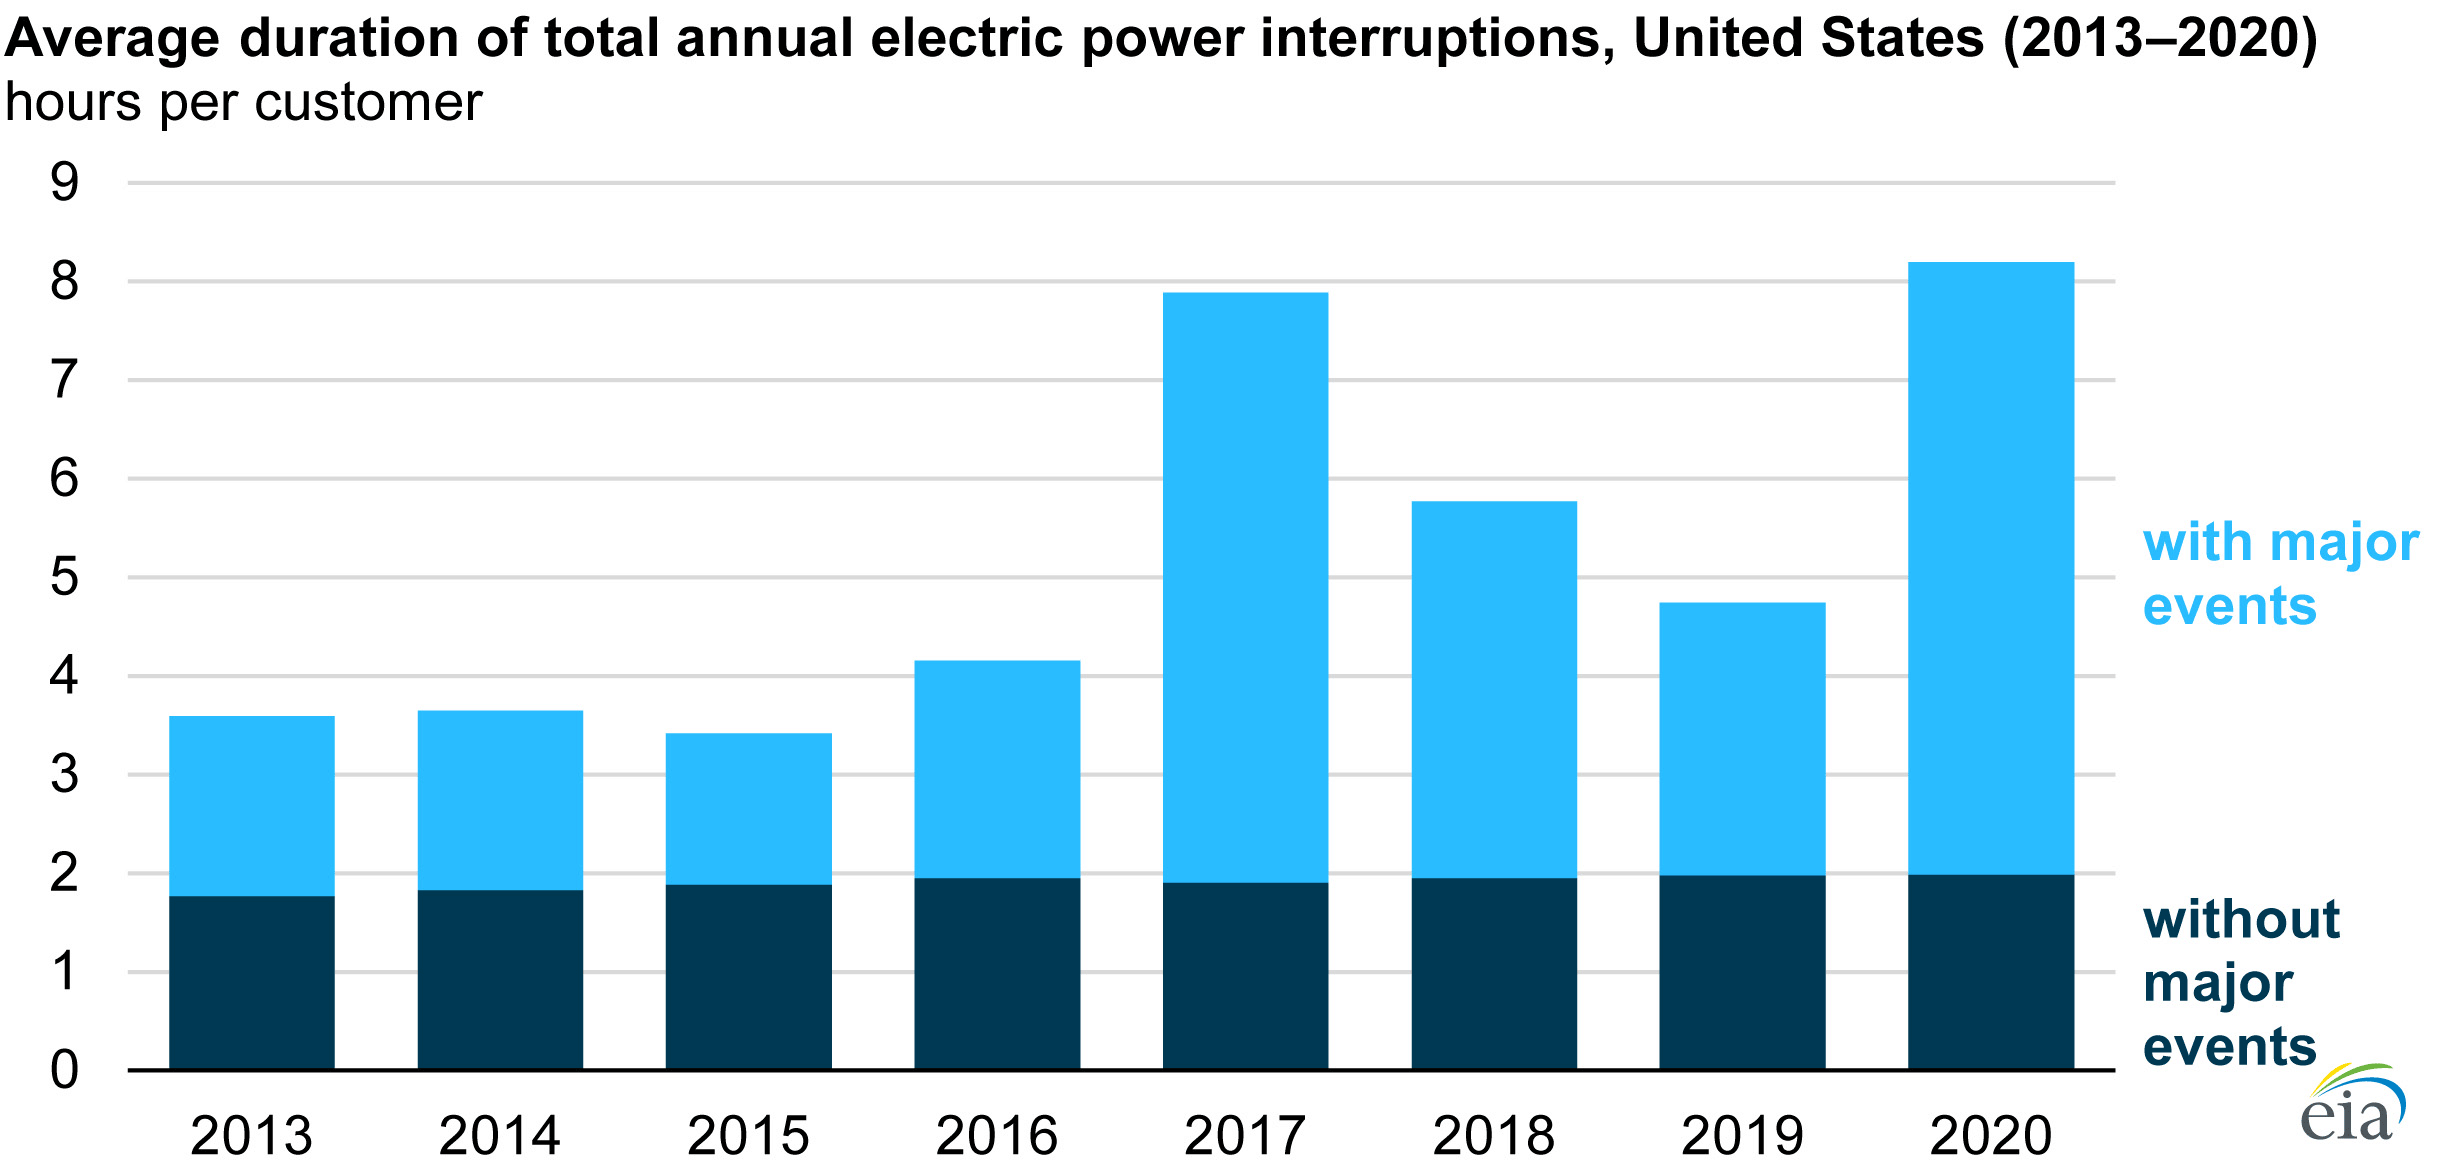 Bar chart showing the average duration of total annual electrical power interruptions, United States 2013-2020